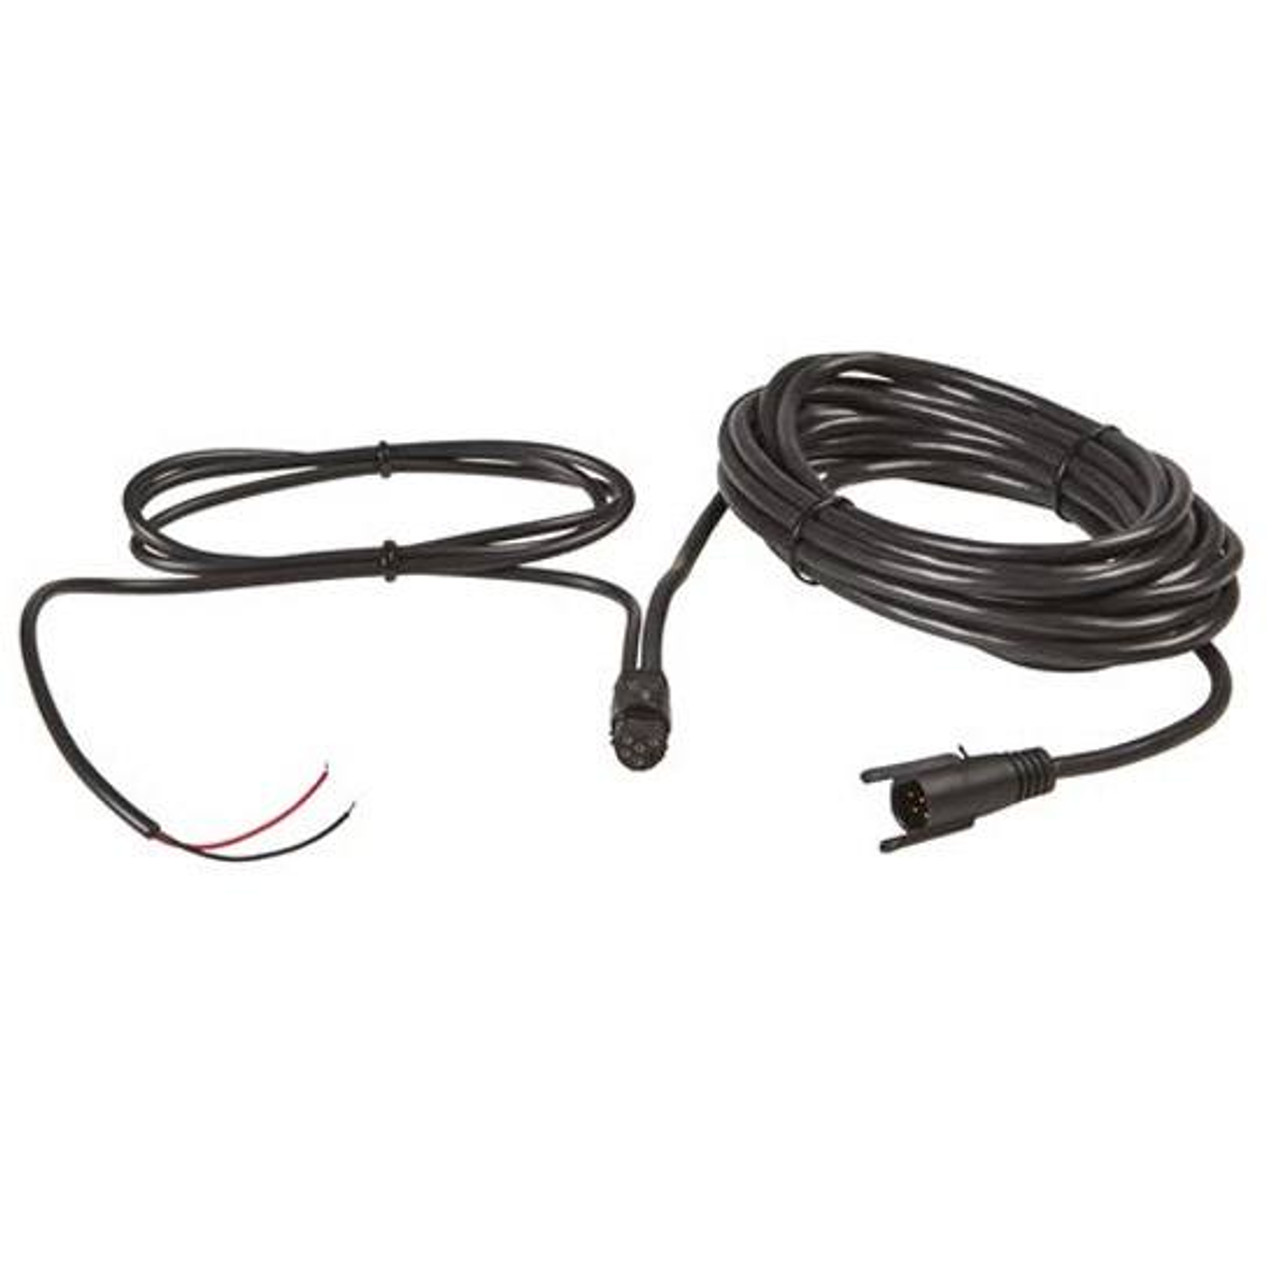 Lowrance Uniplug Transducer Extension Cable 15 Feet 99-91 [FC